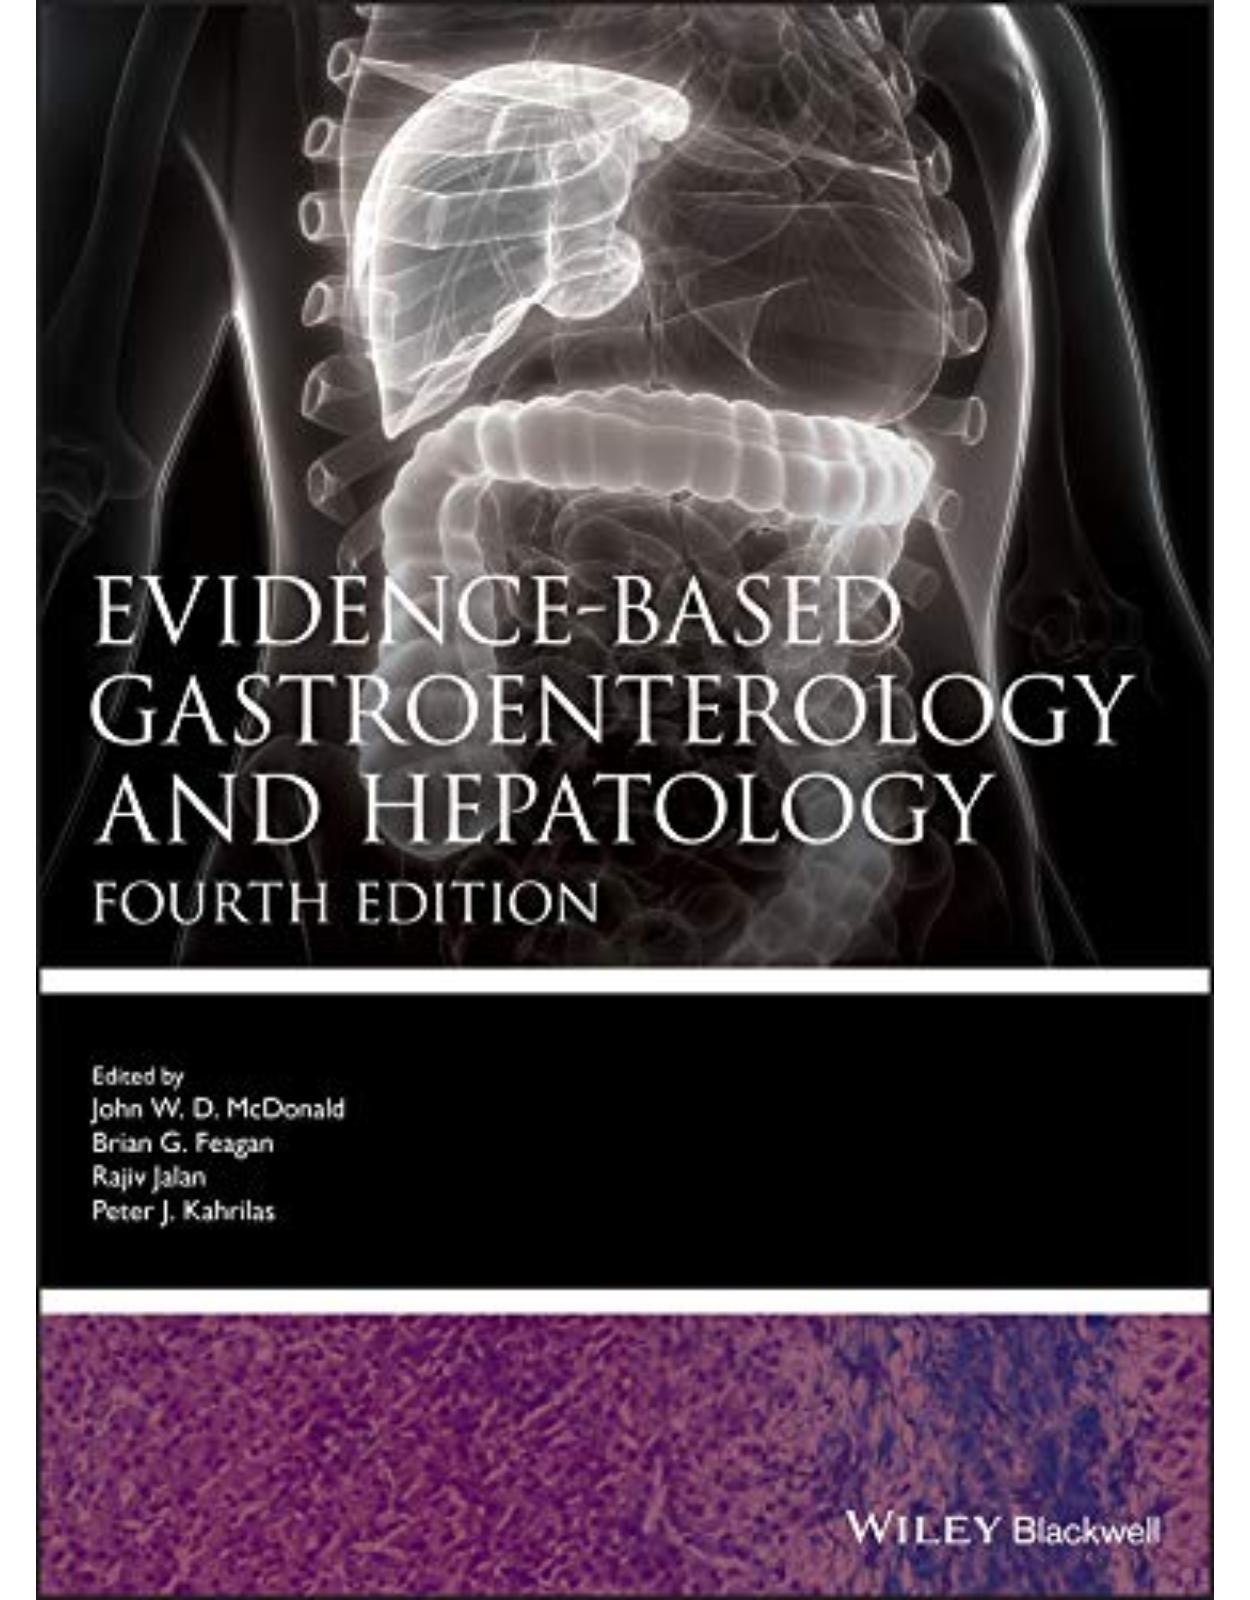 Evidence-based Gastroenterology and Hepatology, 4th Edition